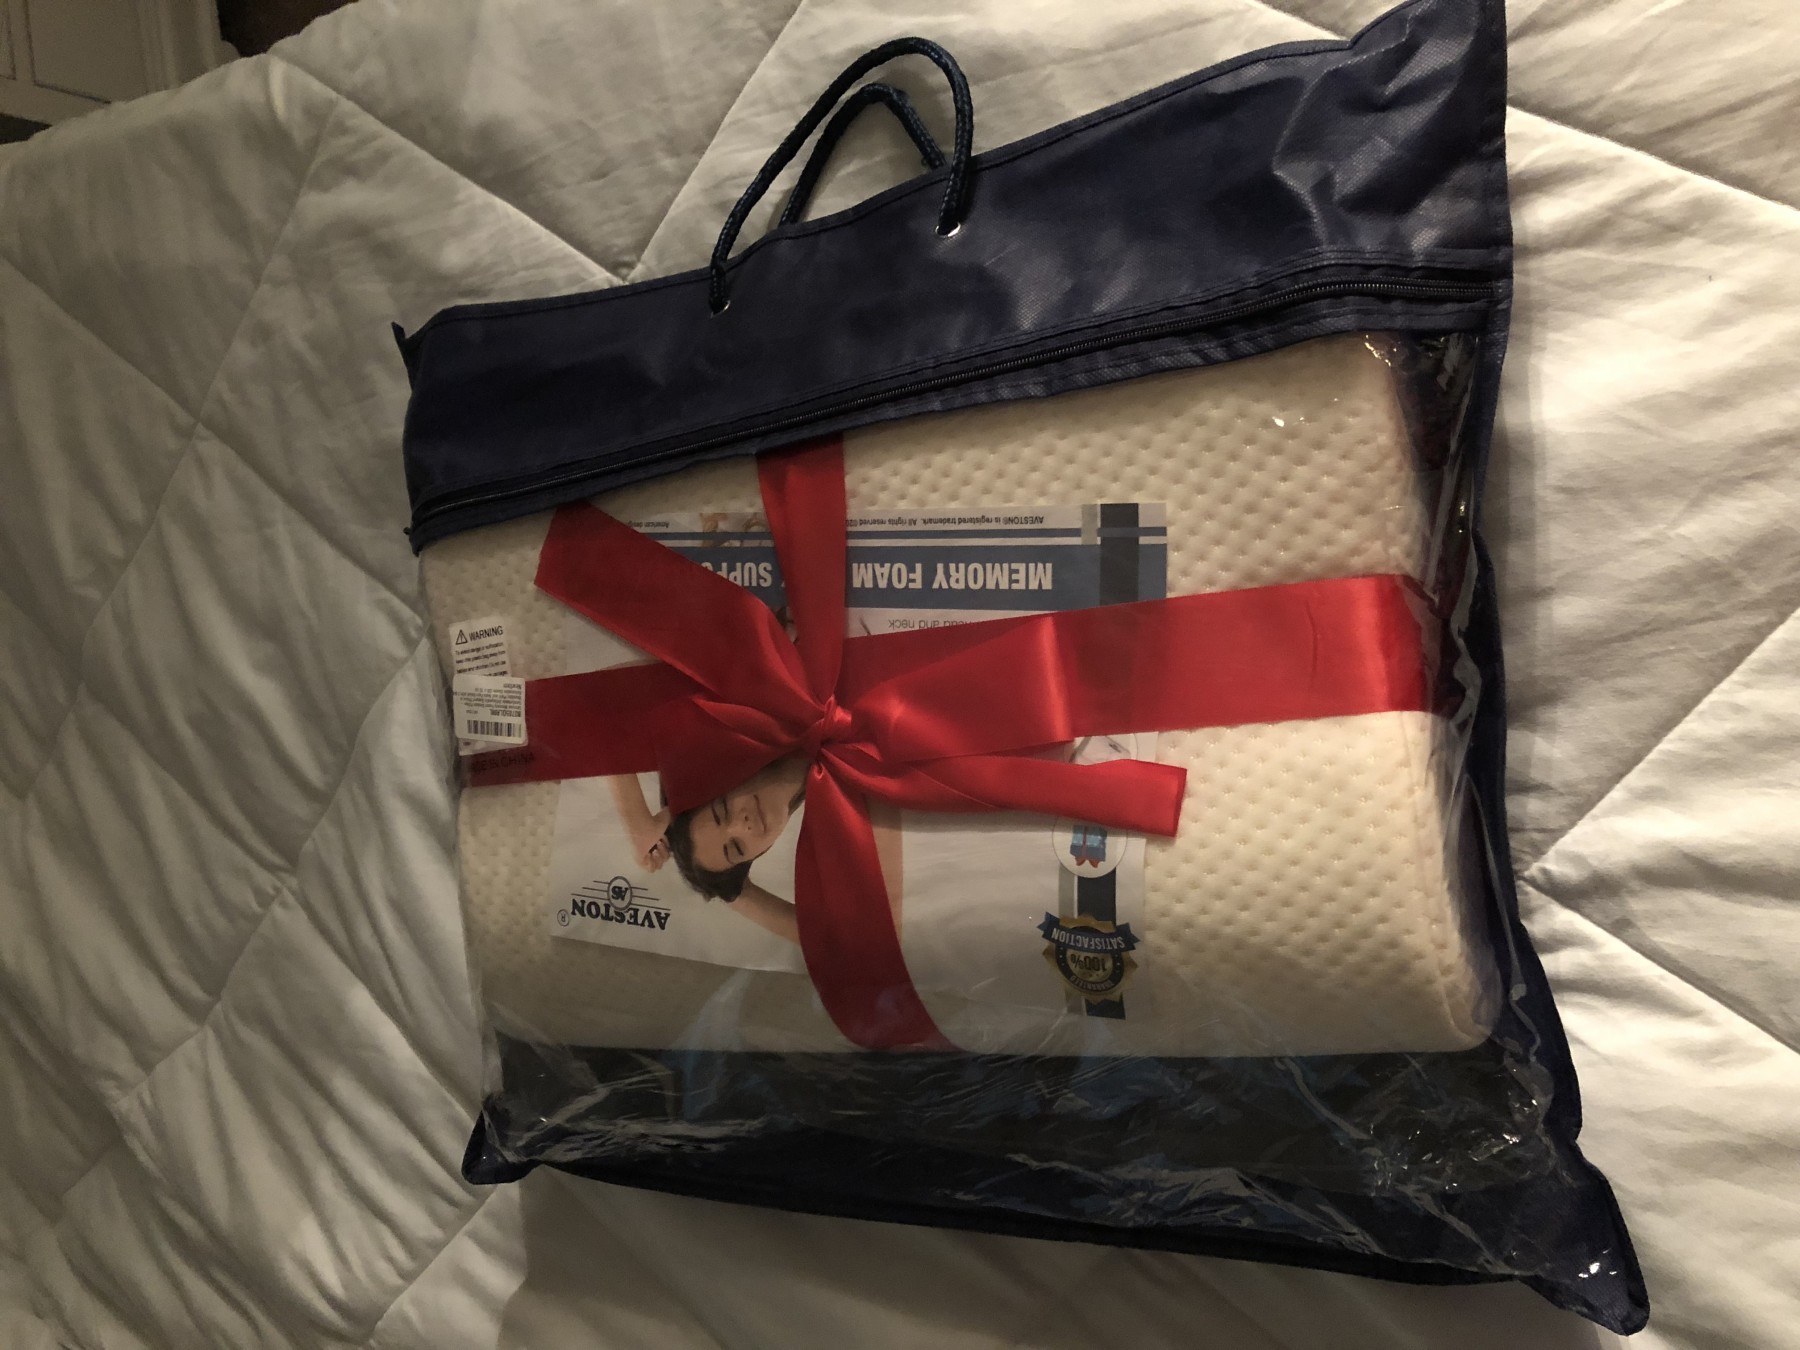 Beautifully packaged super soft pillow